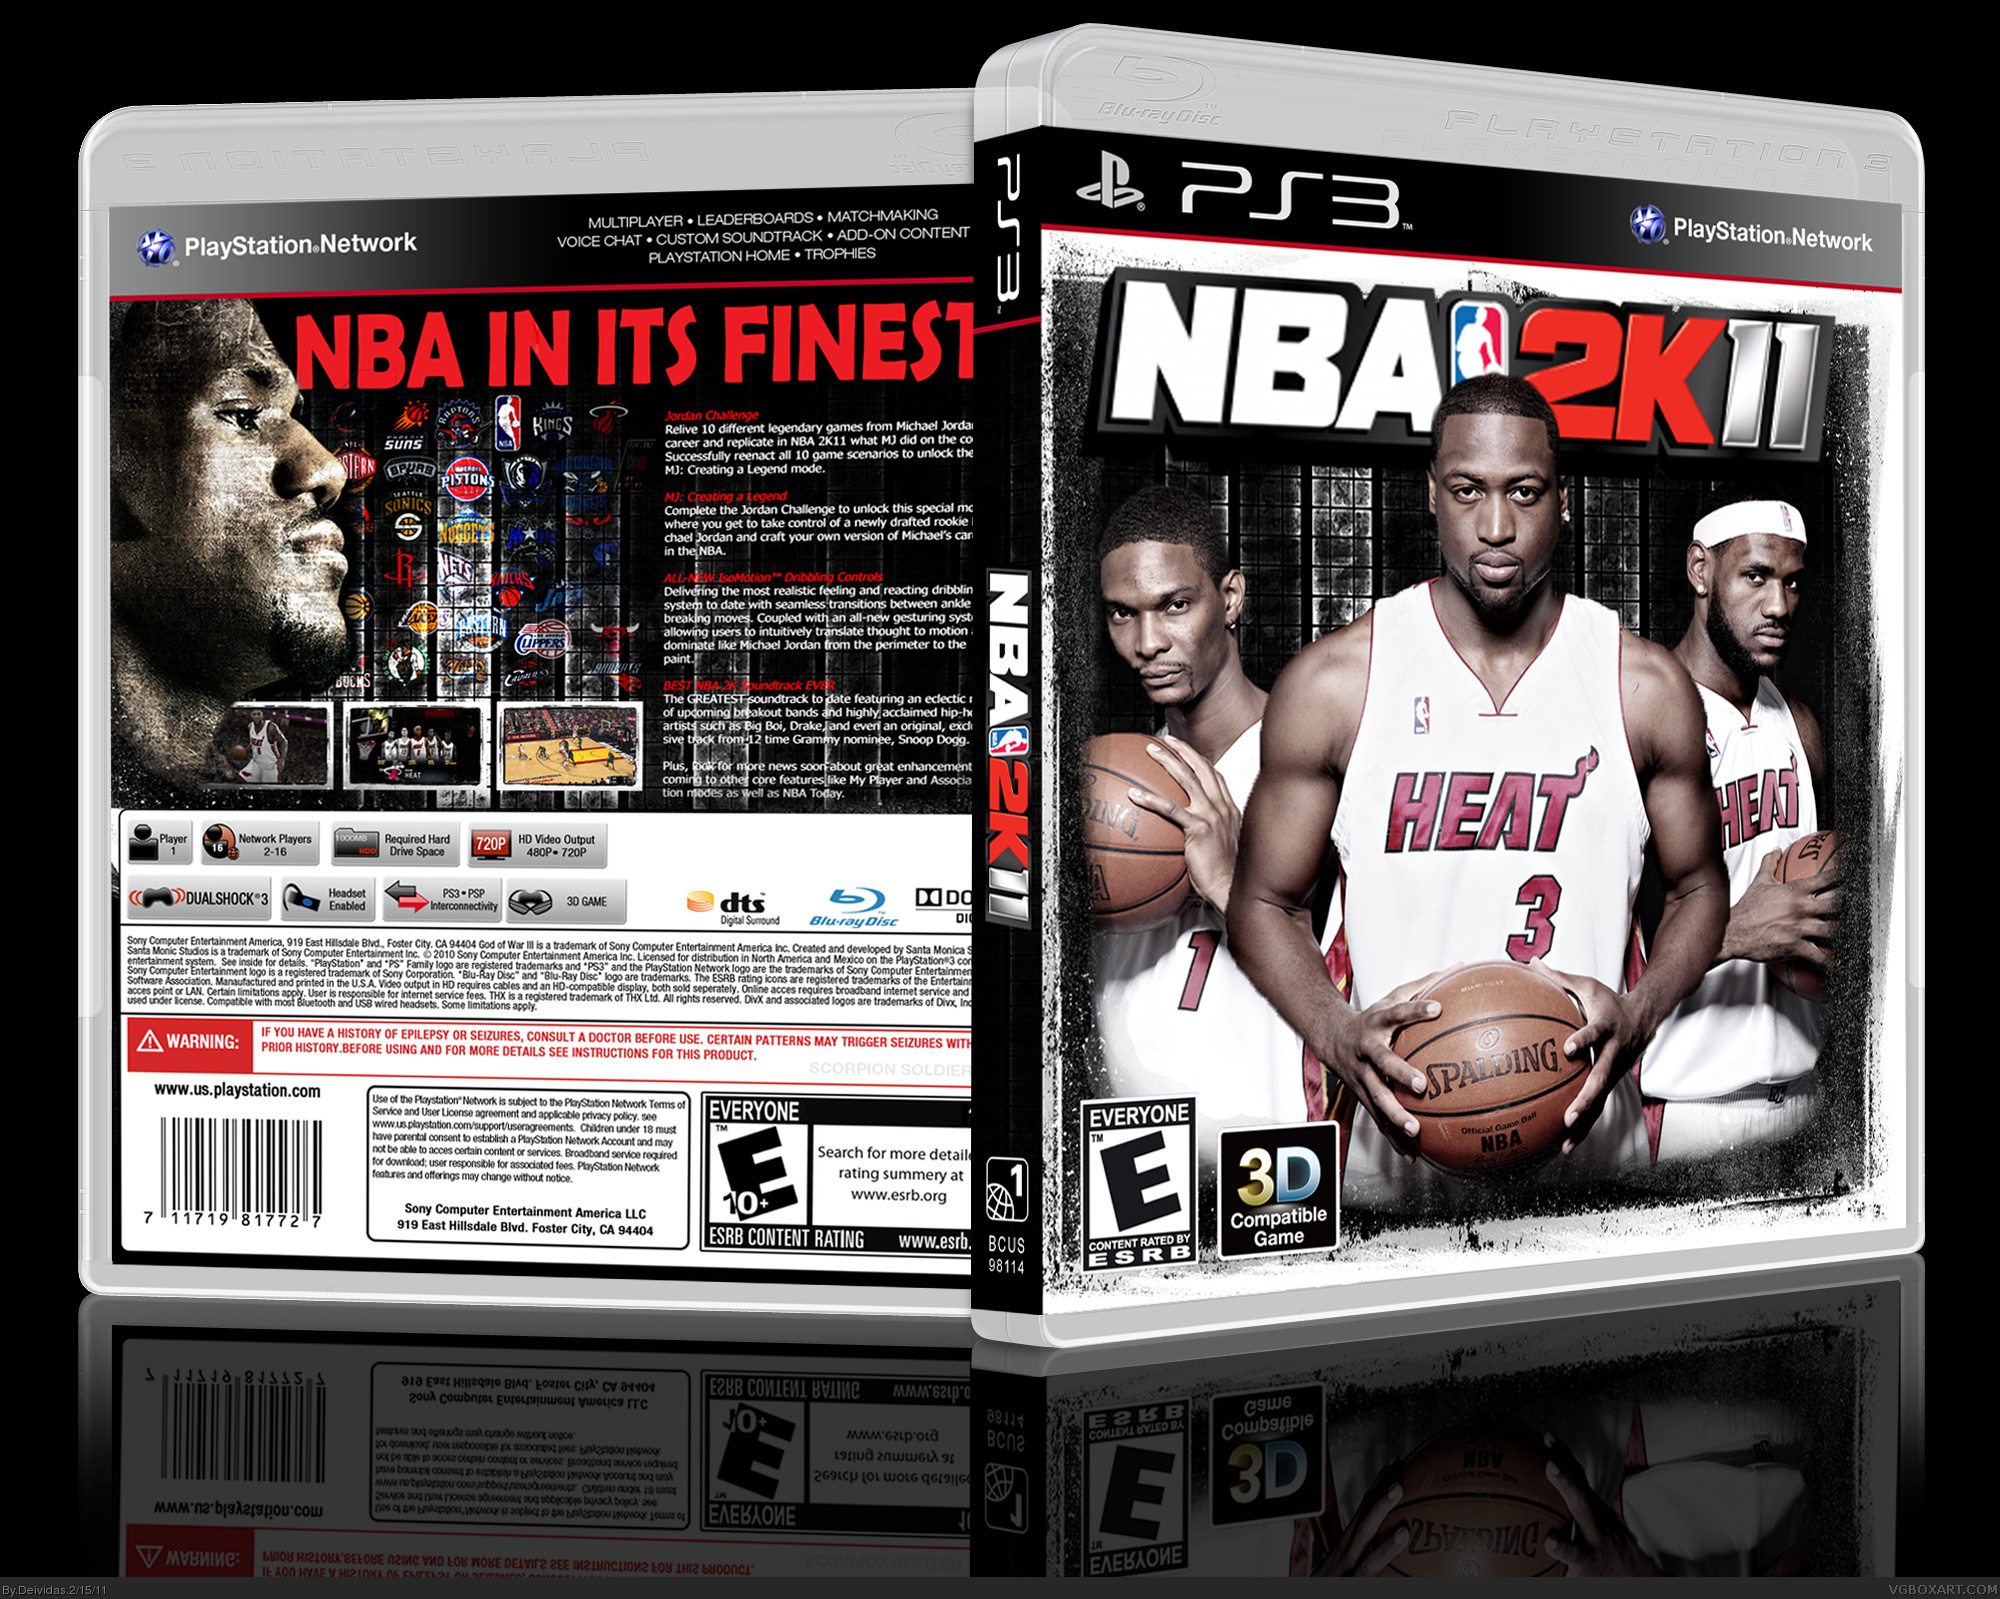 Viewing full size NBA 2K11 box cover